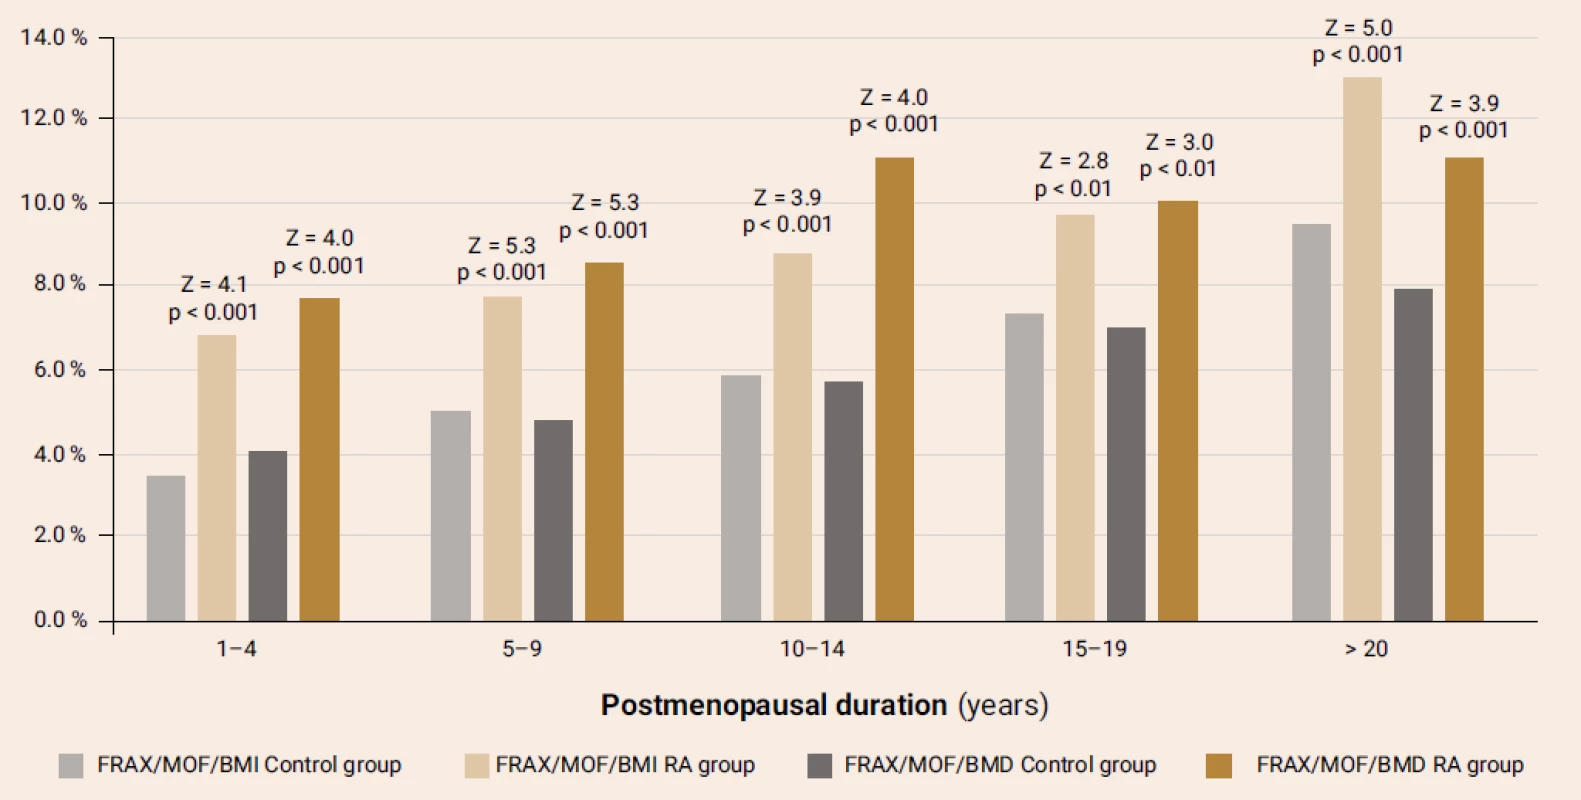 The 10-year probability of major osteoporotic fractures according to the Ukrainian FRAX version with/out
the BMD parameters